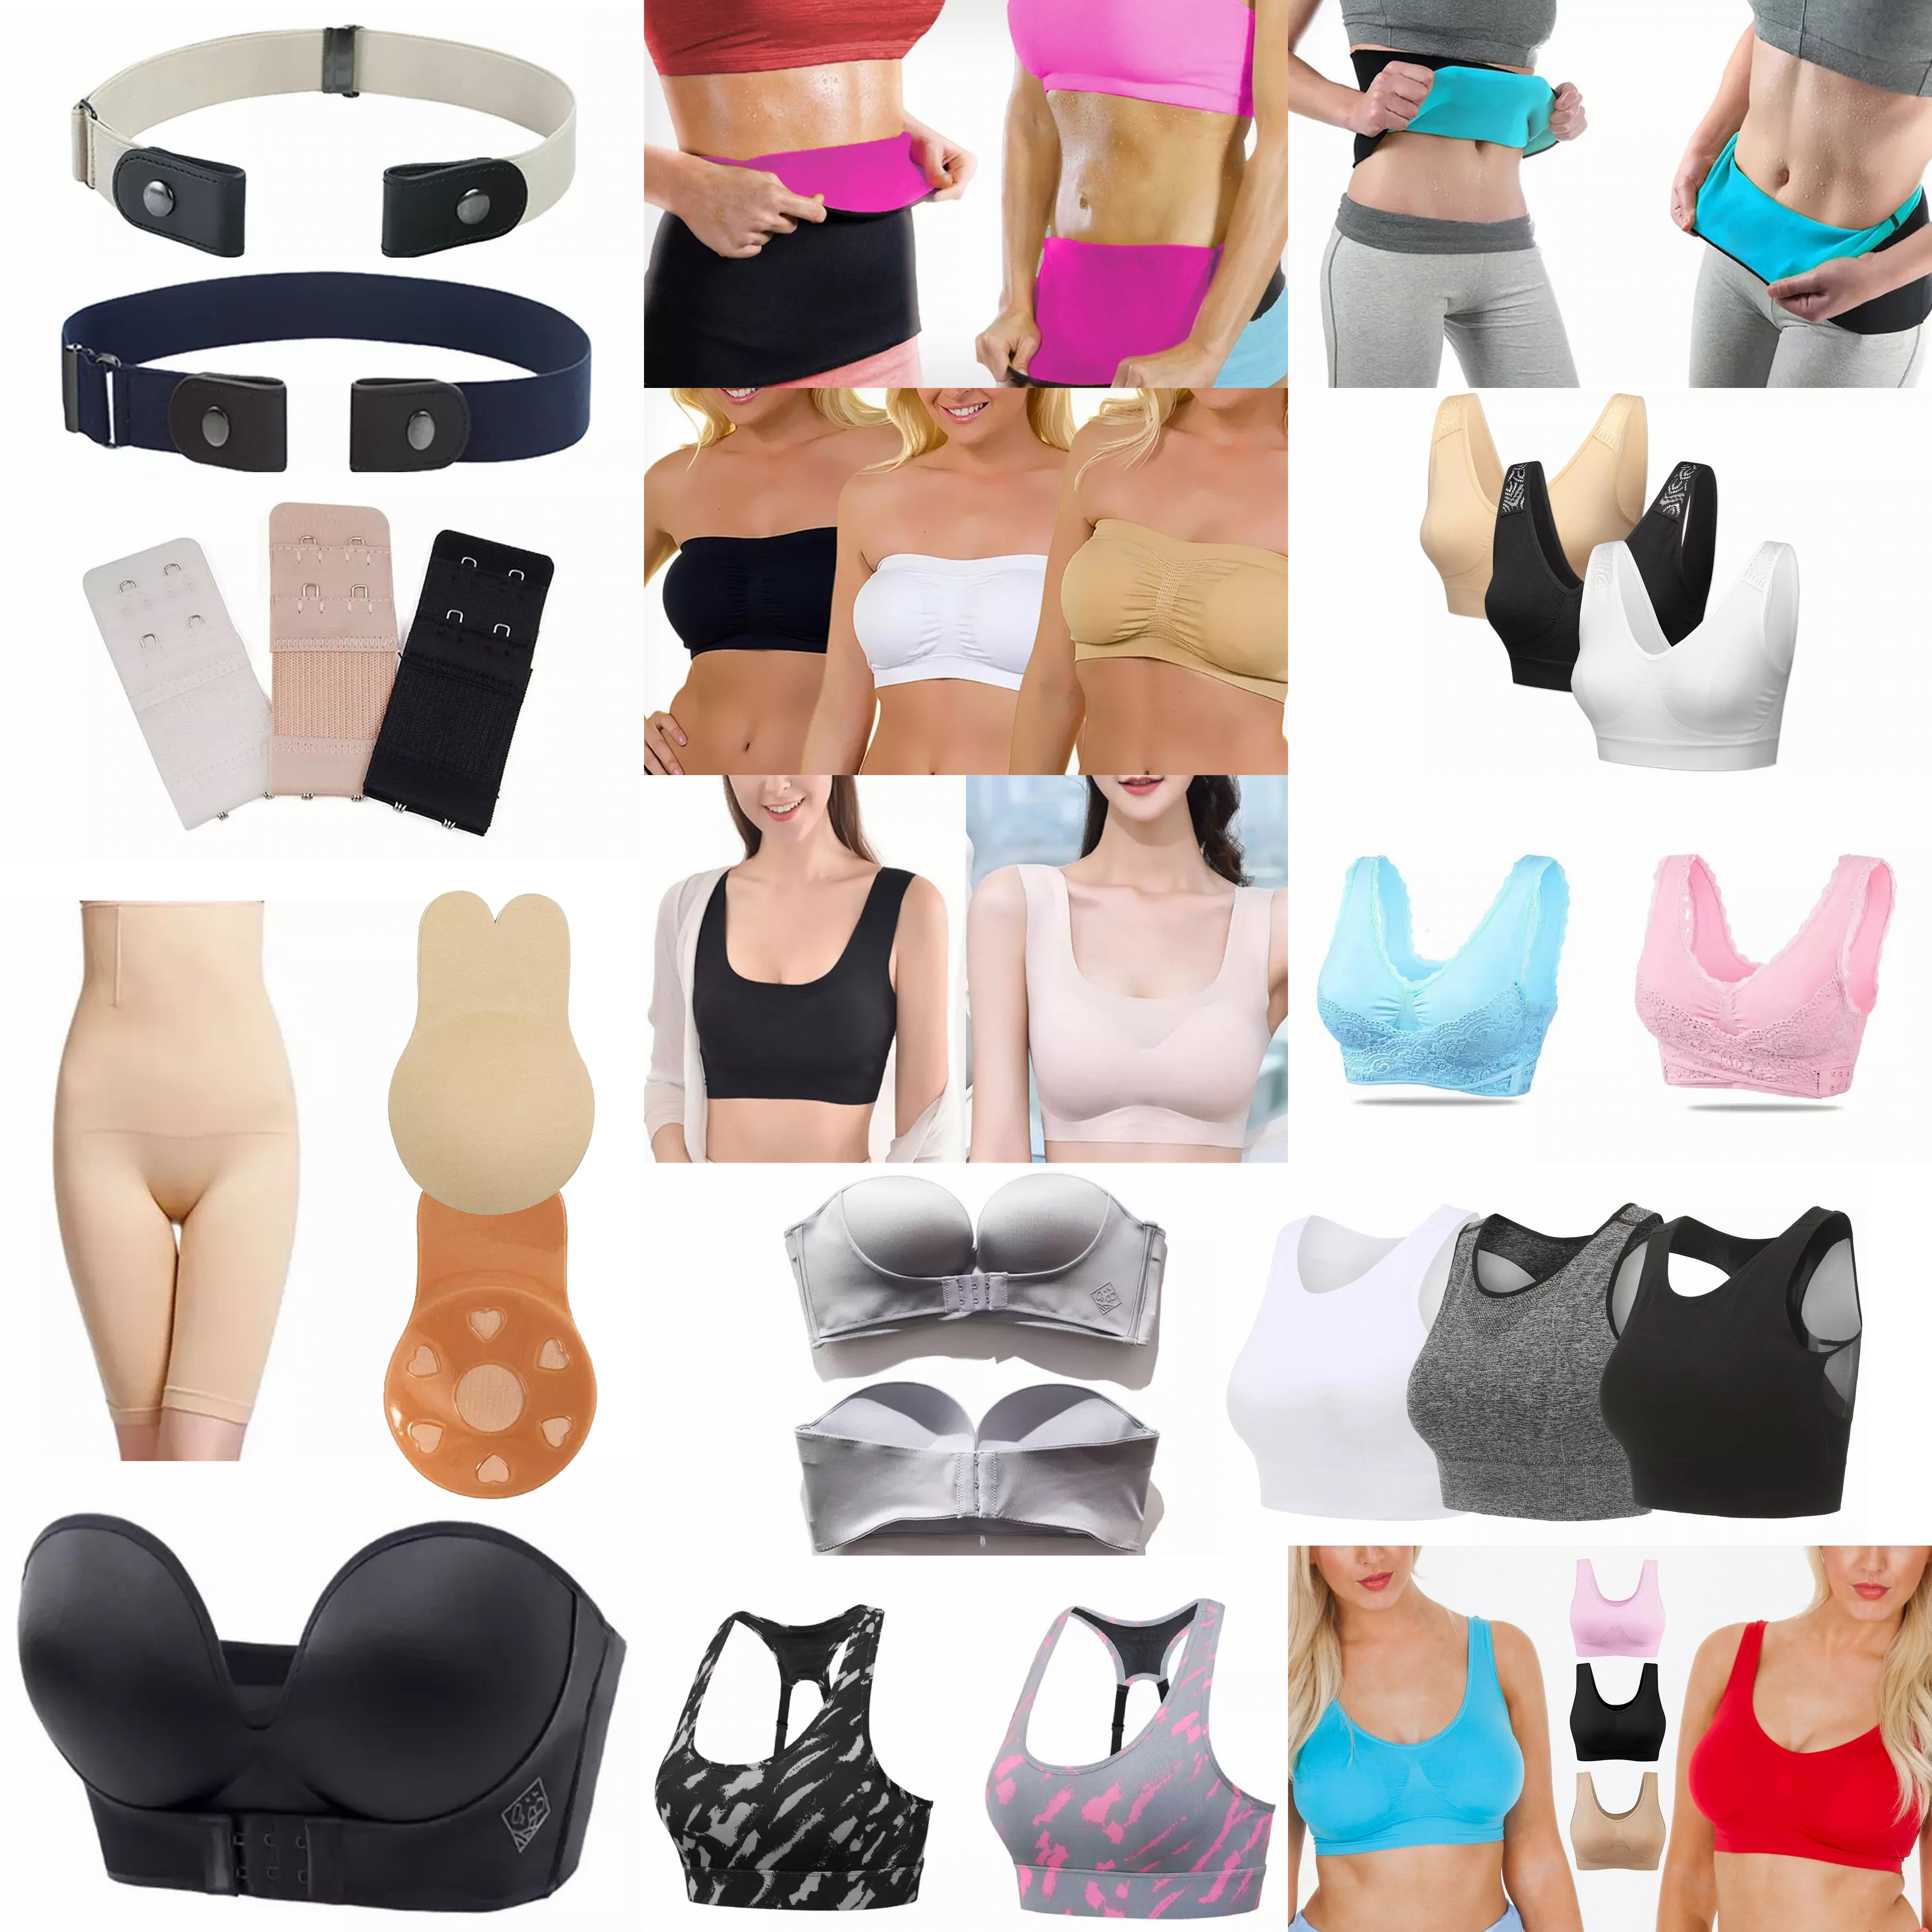 JOBLOT OFFER 28pcs Women Assorted Quality Items: Belts Shapeware, Bras & Bra Accessories in Mixed Sizes Total RRP £778 